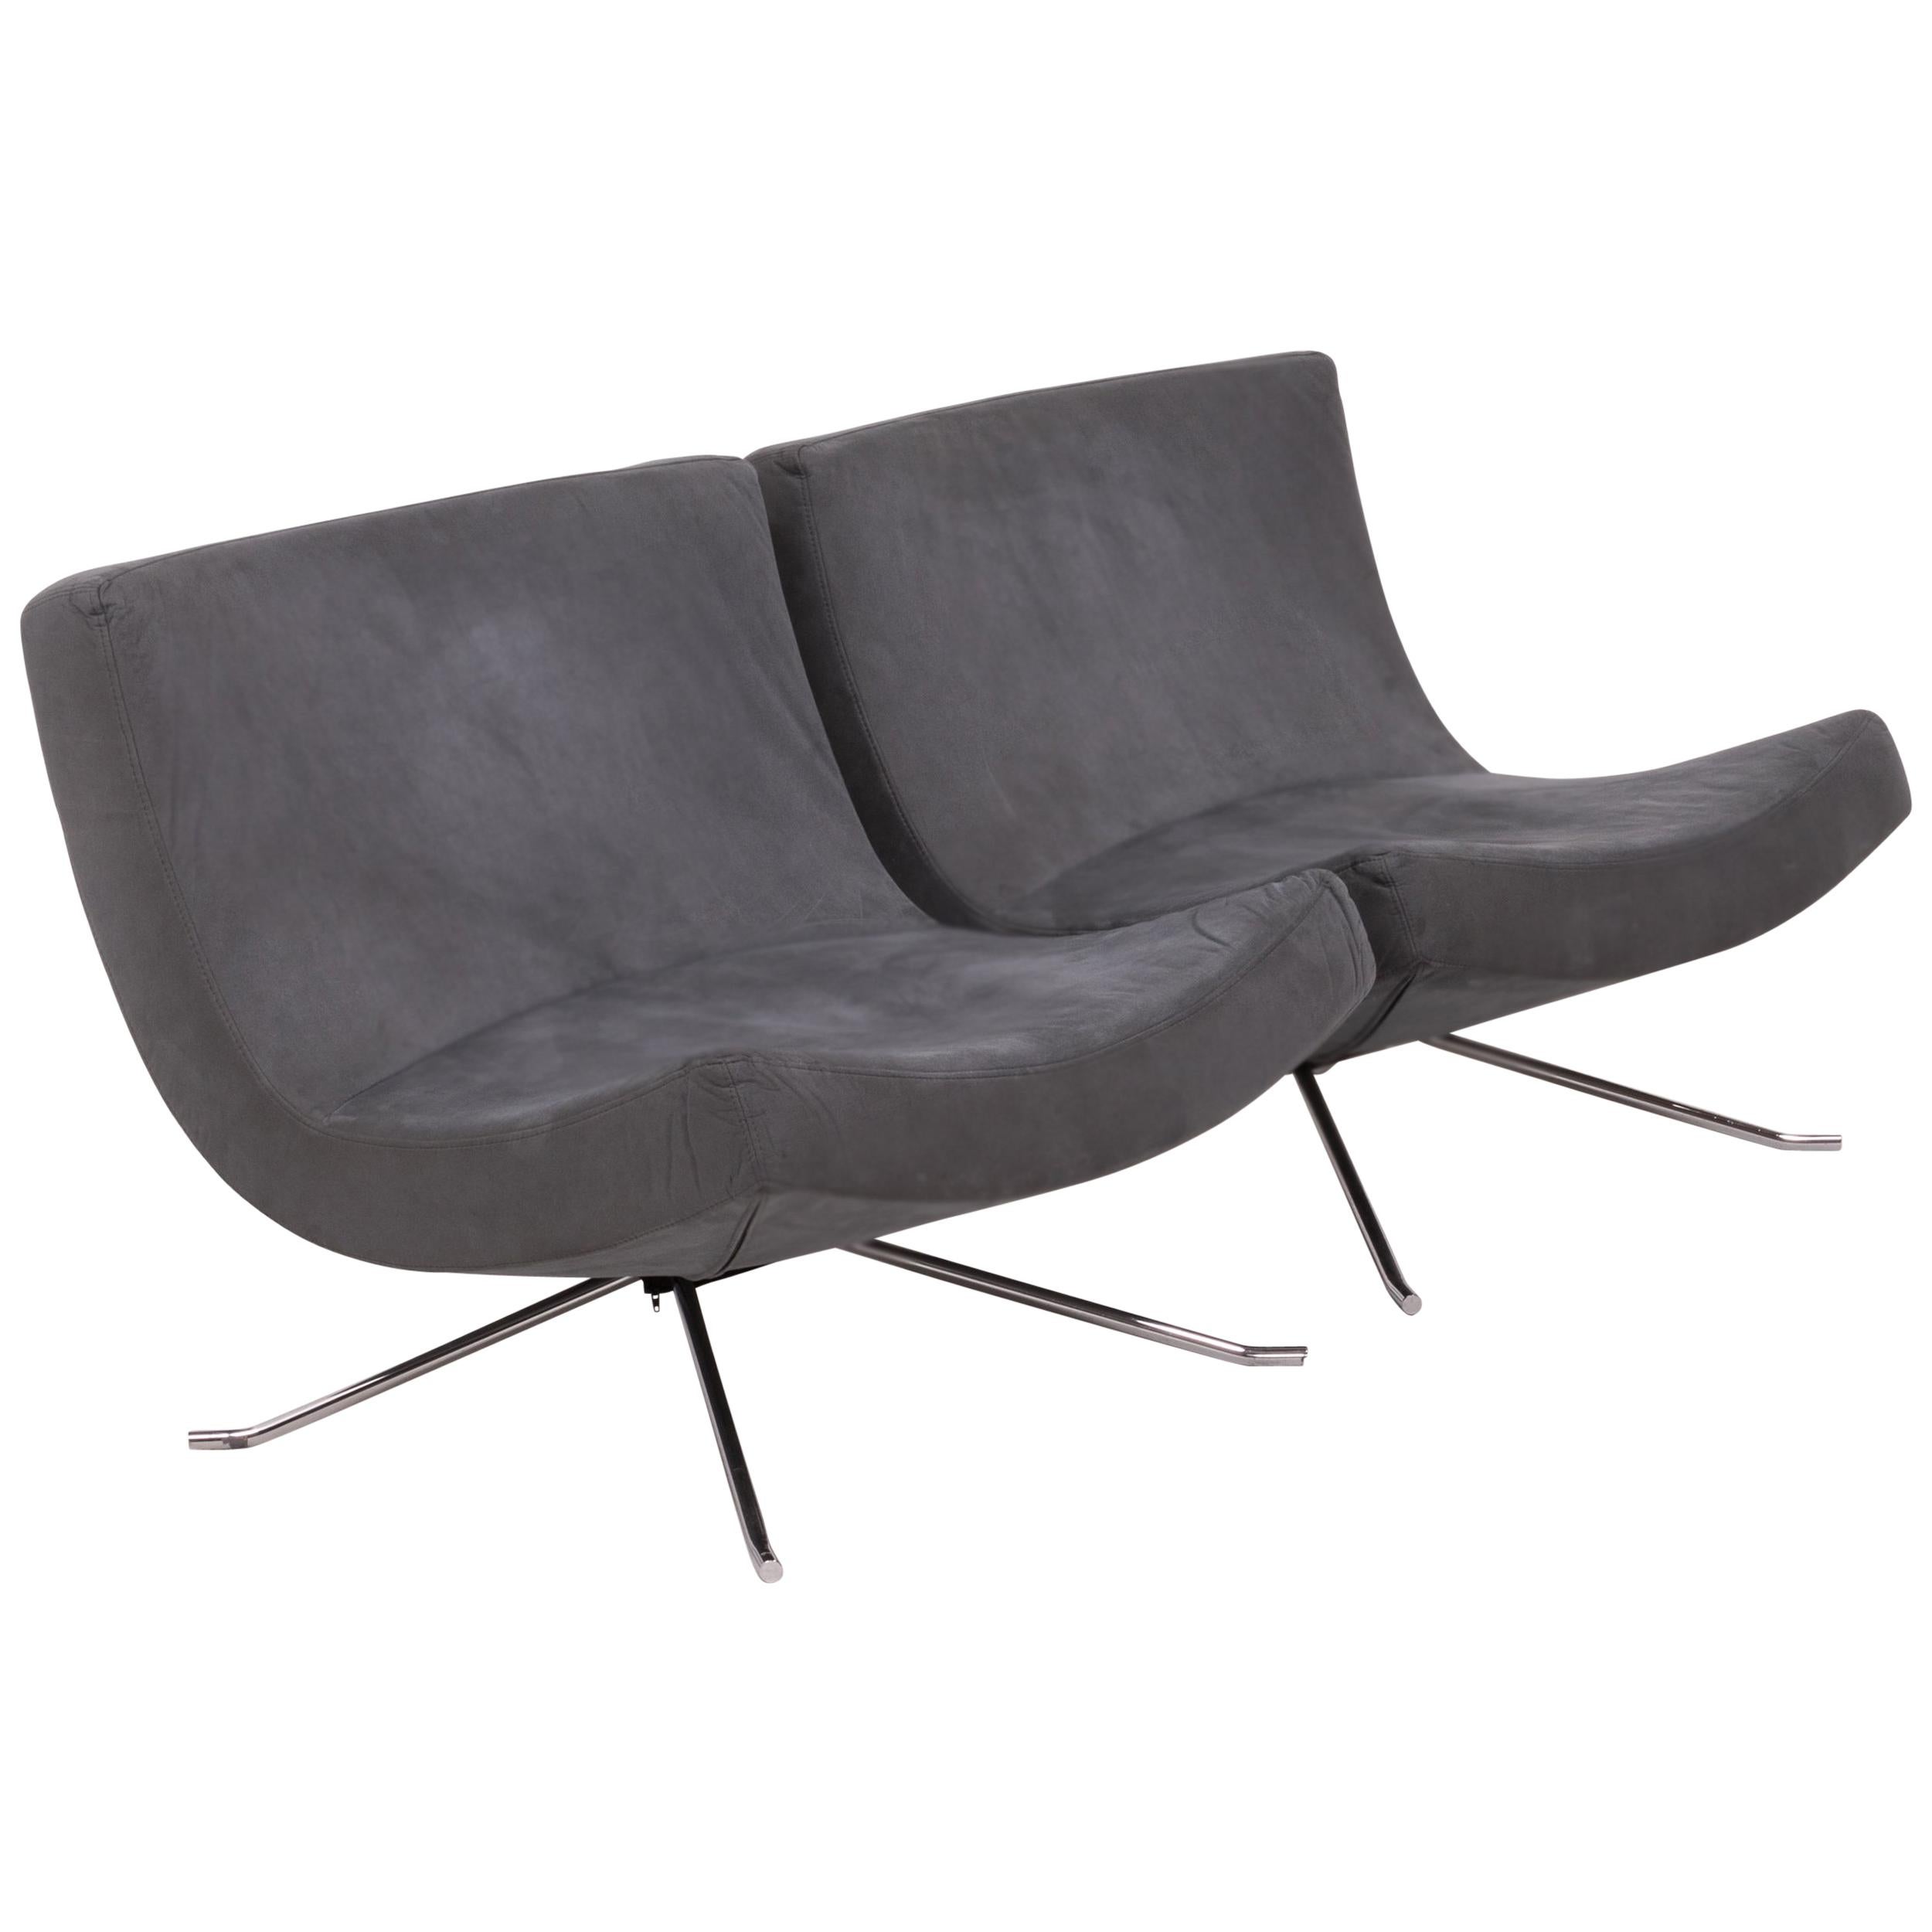 Set of Two Pop Chairs by Christian Werner for Ligne Roset